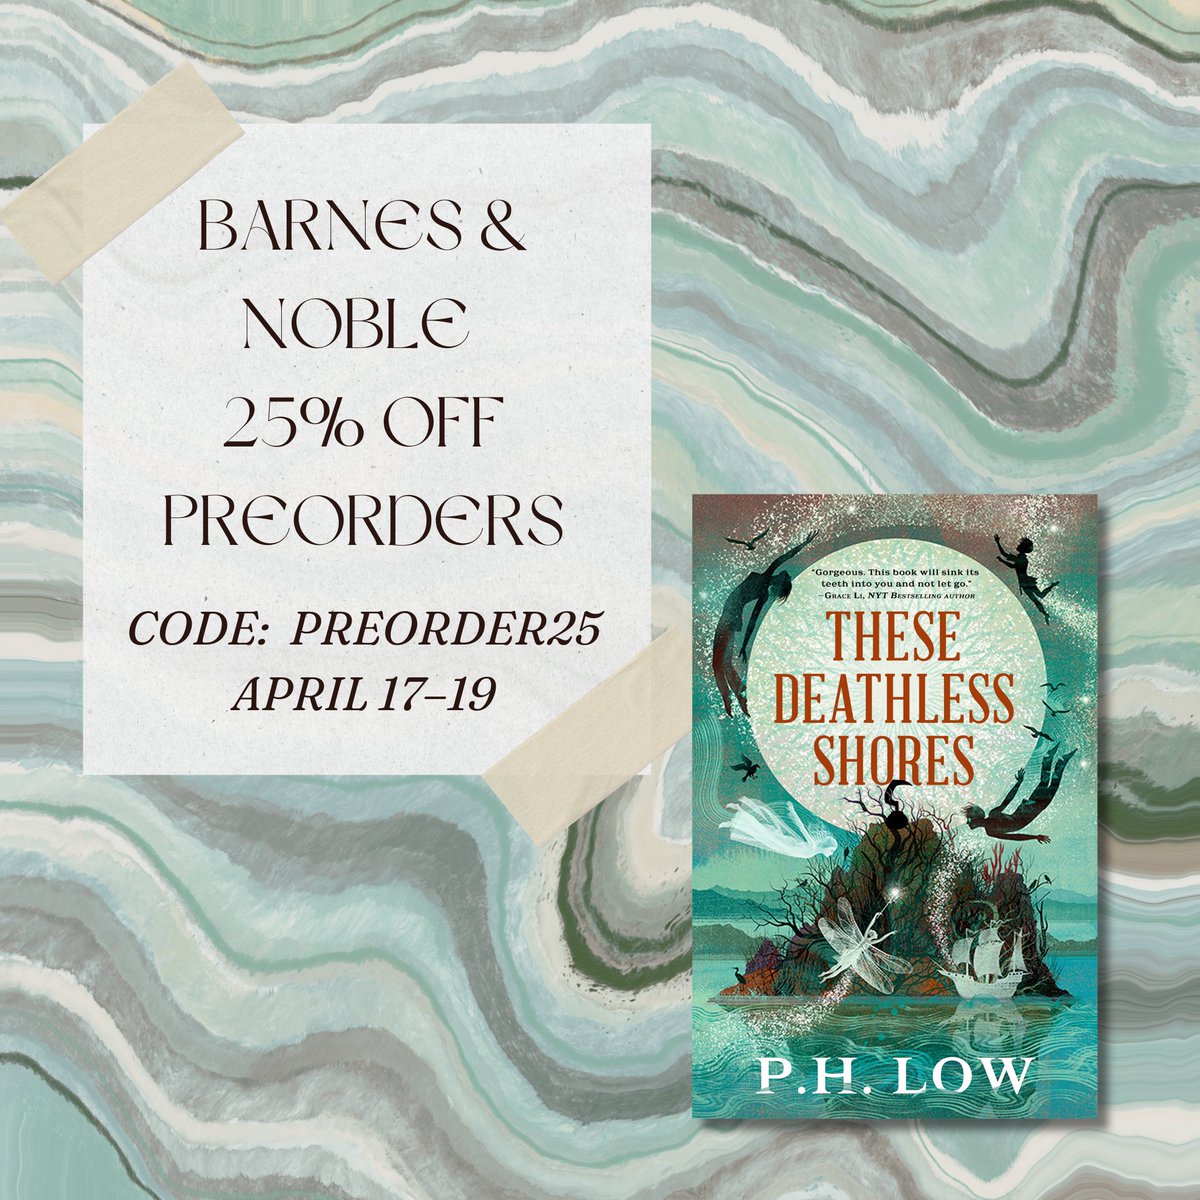 TDS is on sale at B&N through April 19th! now it can be yours for less than a panera meal 🥖